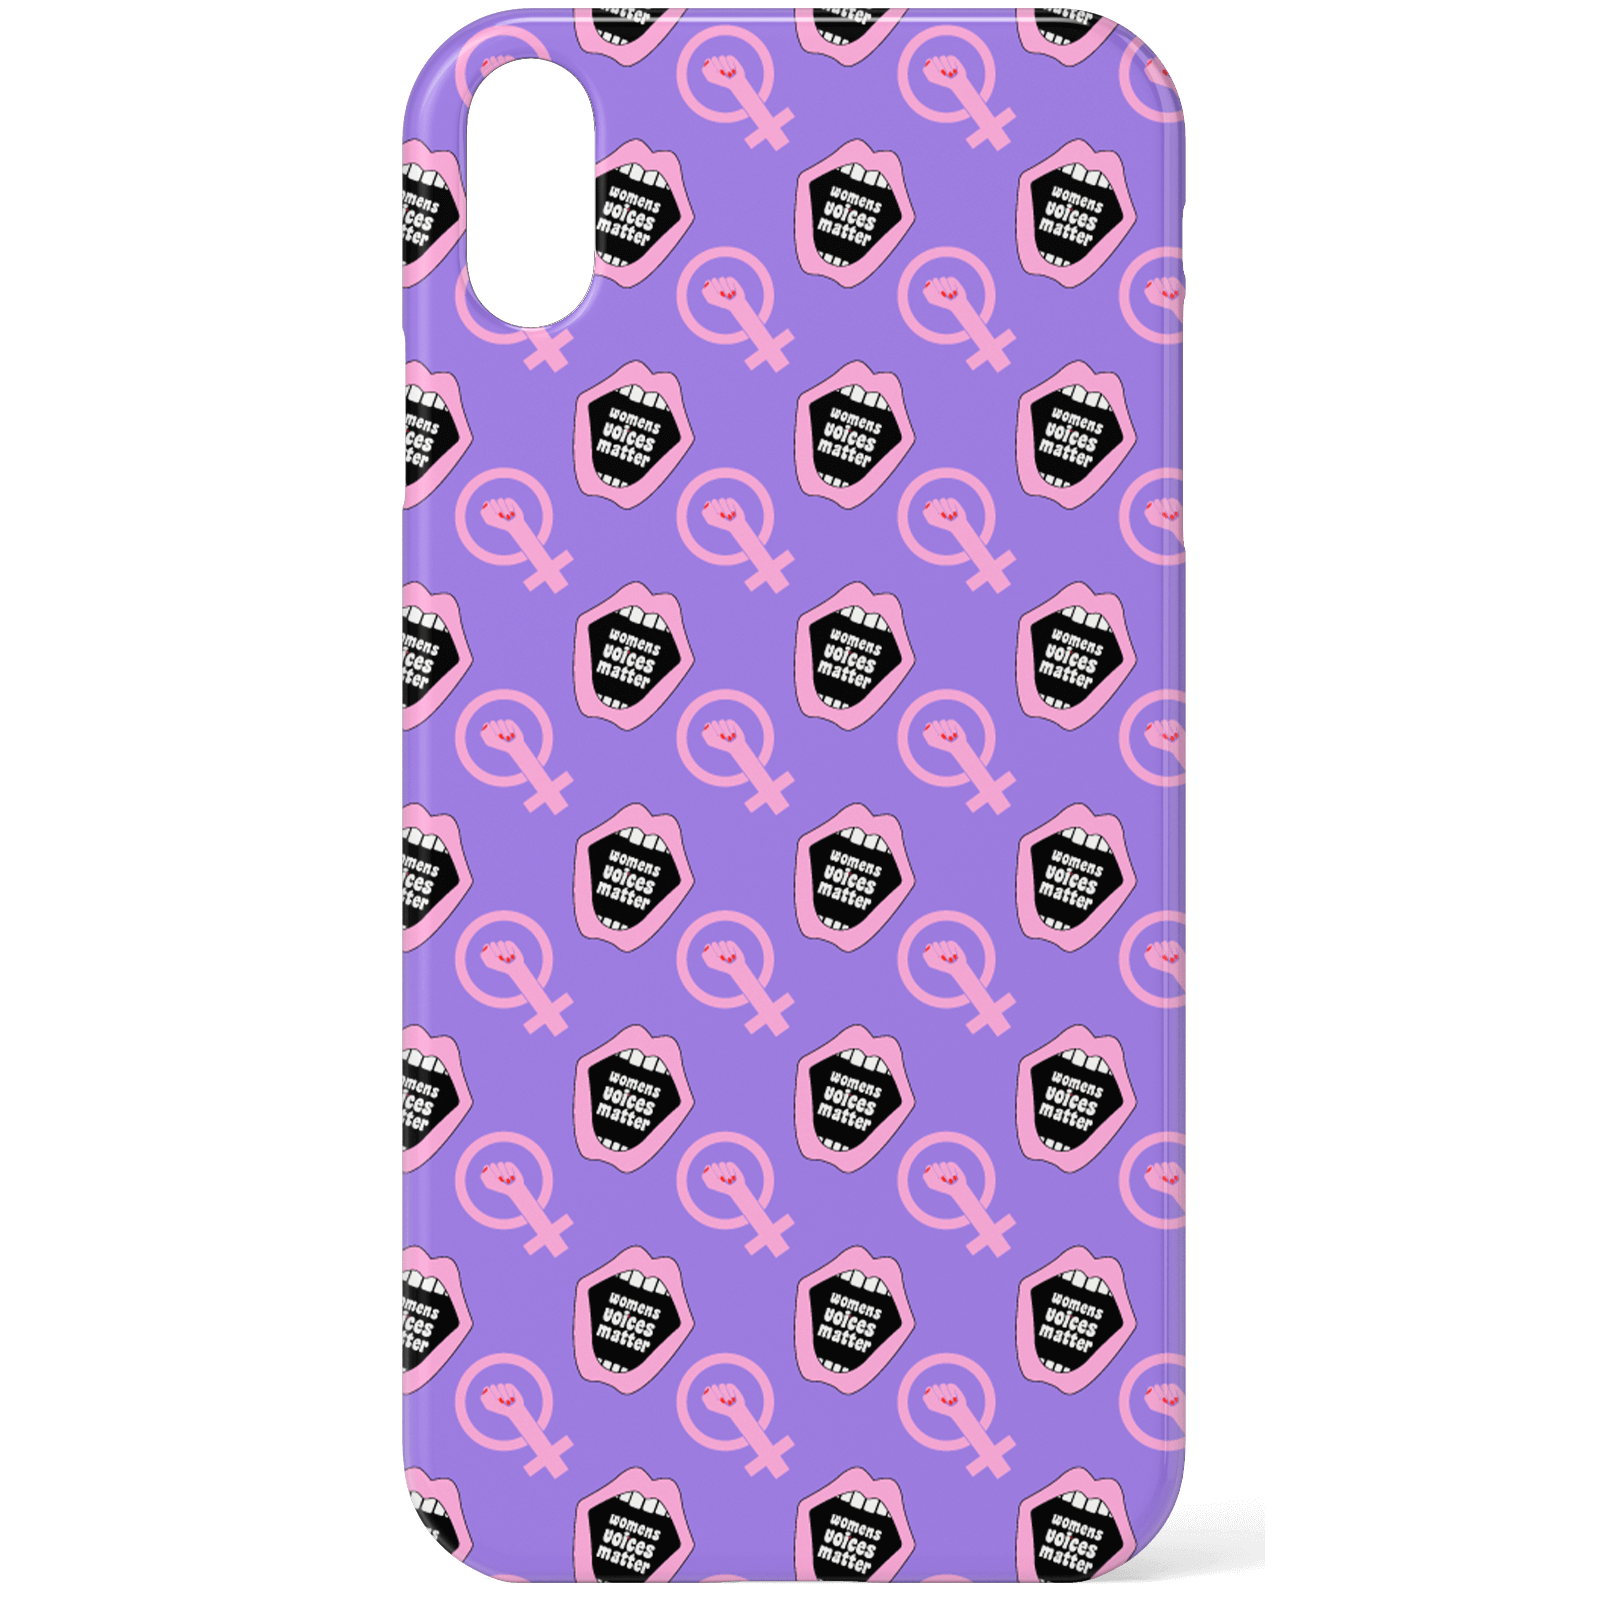 Feminist Womens Power Phone Case for iPhone and Android - iPhone 5/5s - Snap Case - Matte